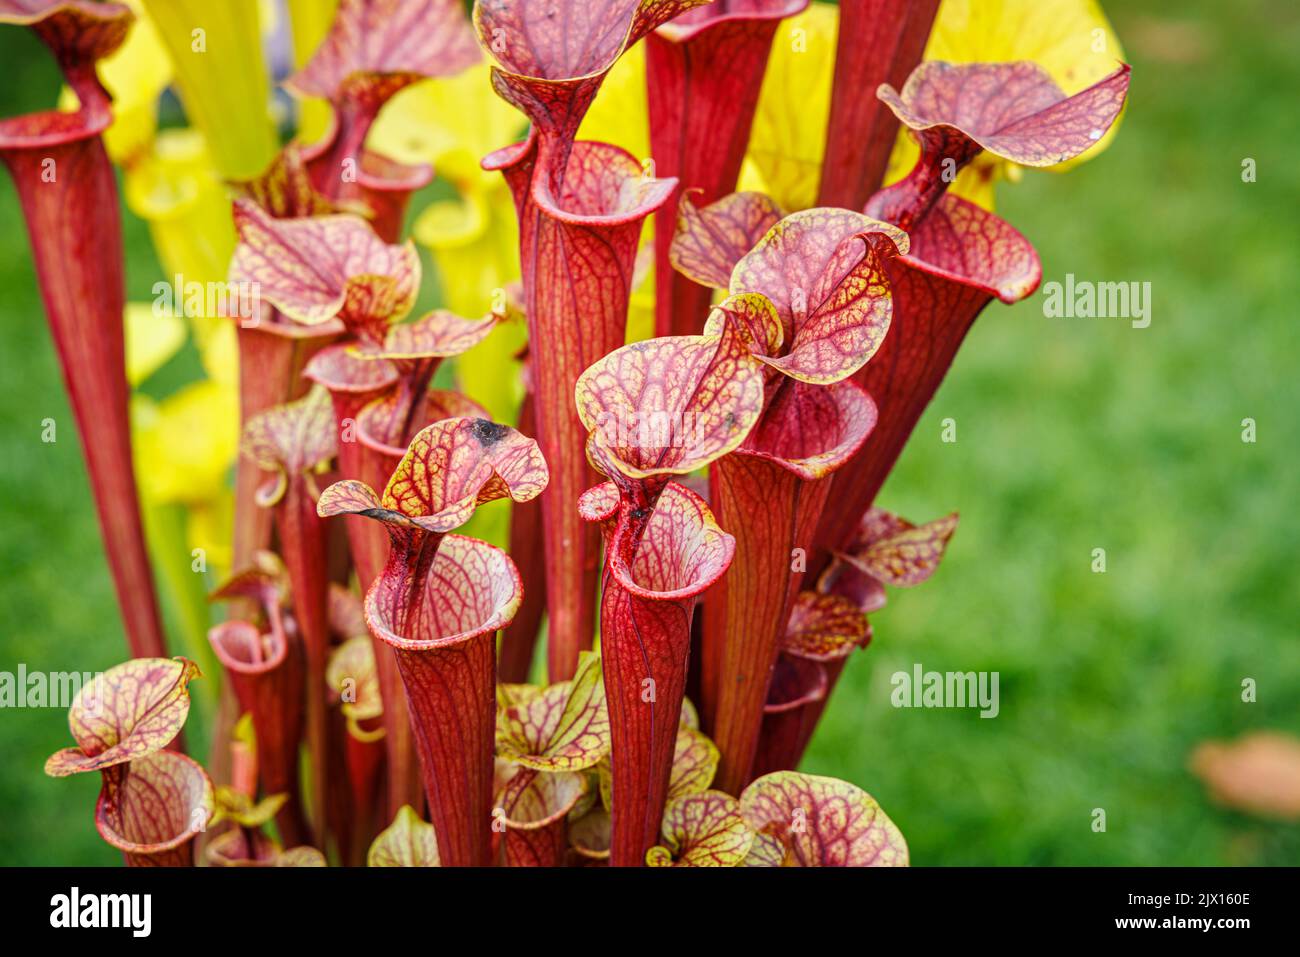 Carnivorous pitcher plant Sarracenia flava at the annual Wisley Taste of Autumn Festival in September at RHS Wisley, Surrey, south-east England Stock Photo